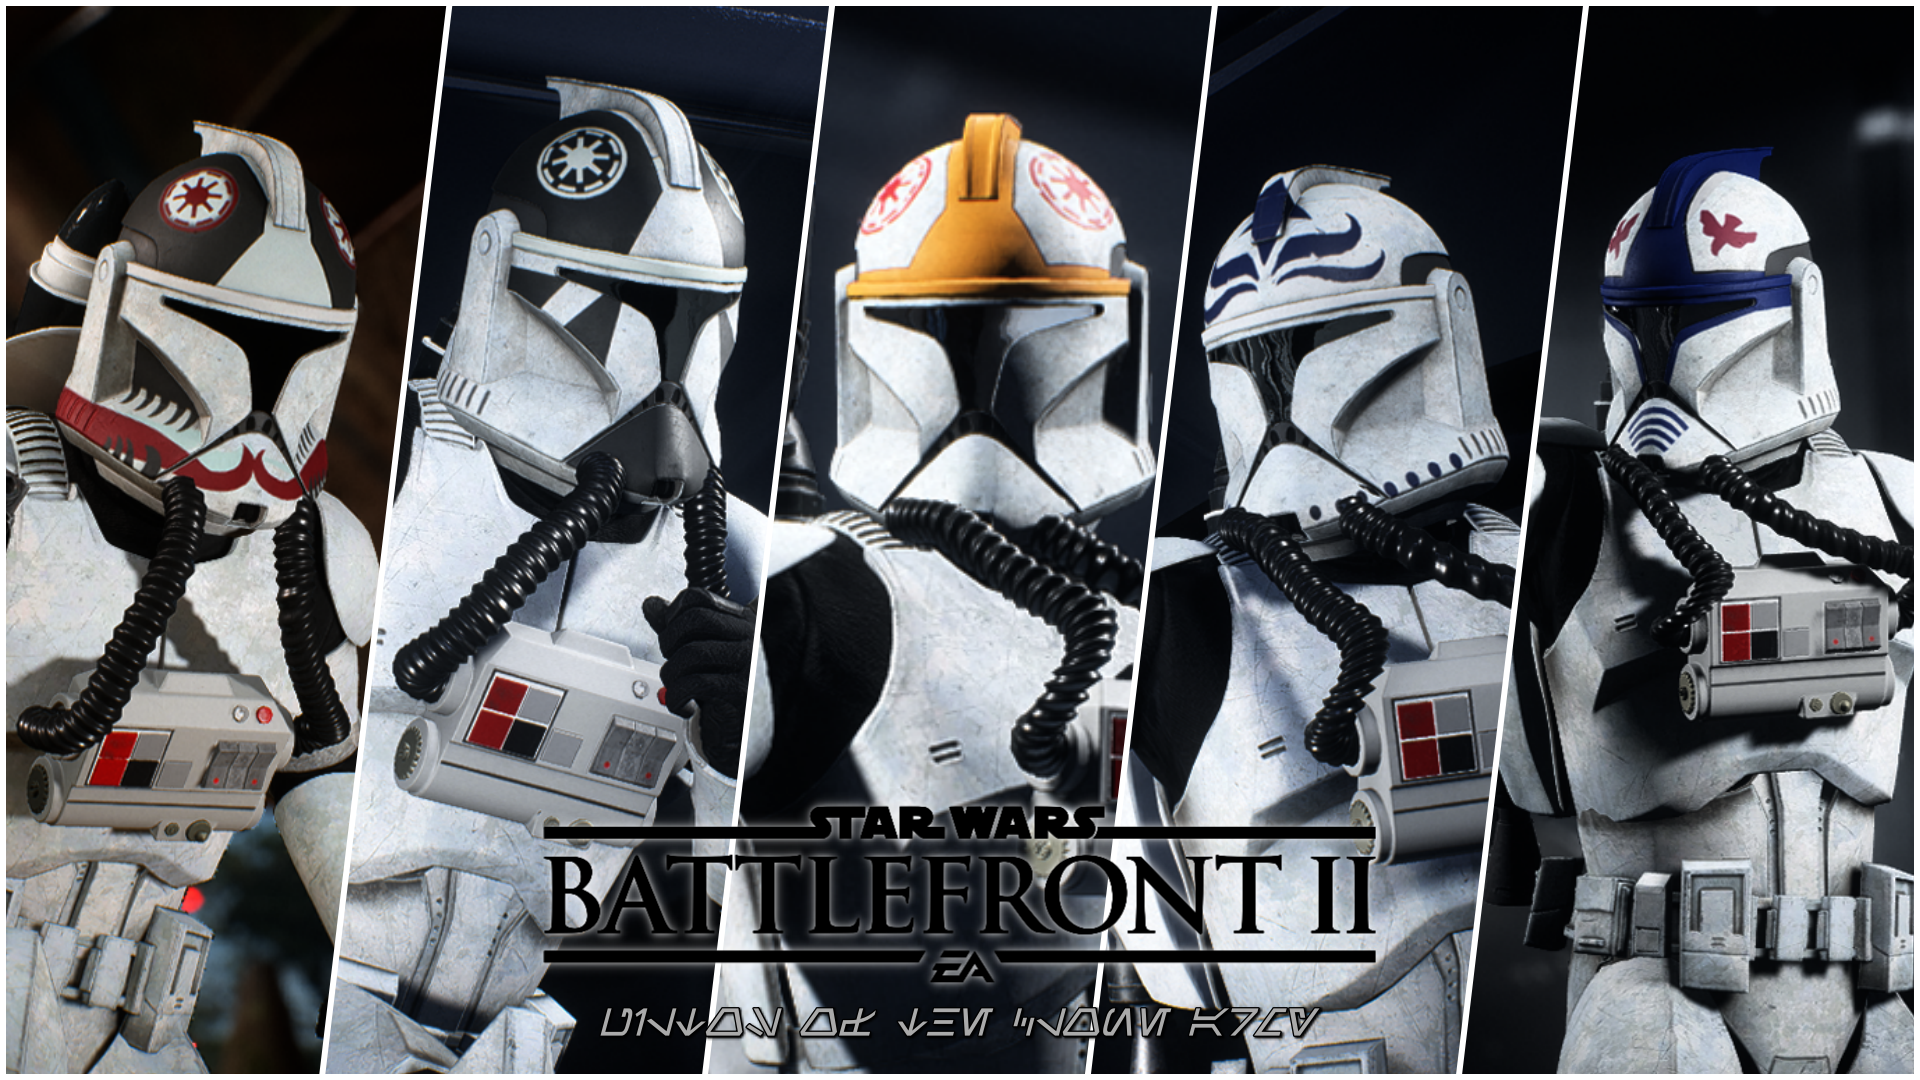 New week, new mod! This time I updated an older mod that features the best clone pilots from the clone army. Odd Ball, Hawk, Matchstick, shadow 12 and Axe